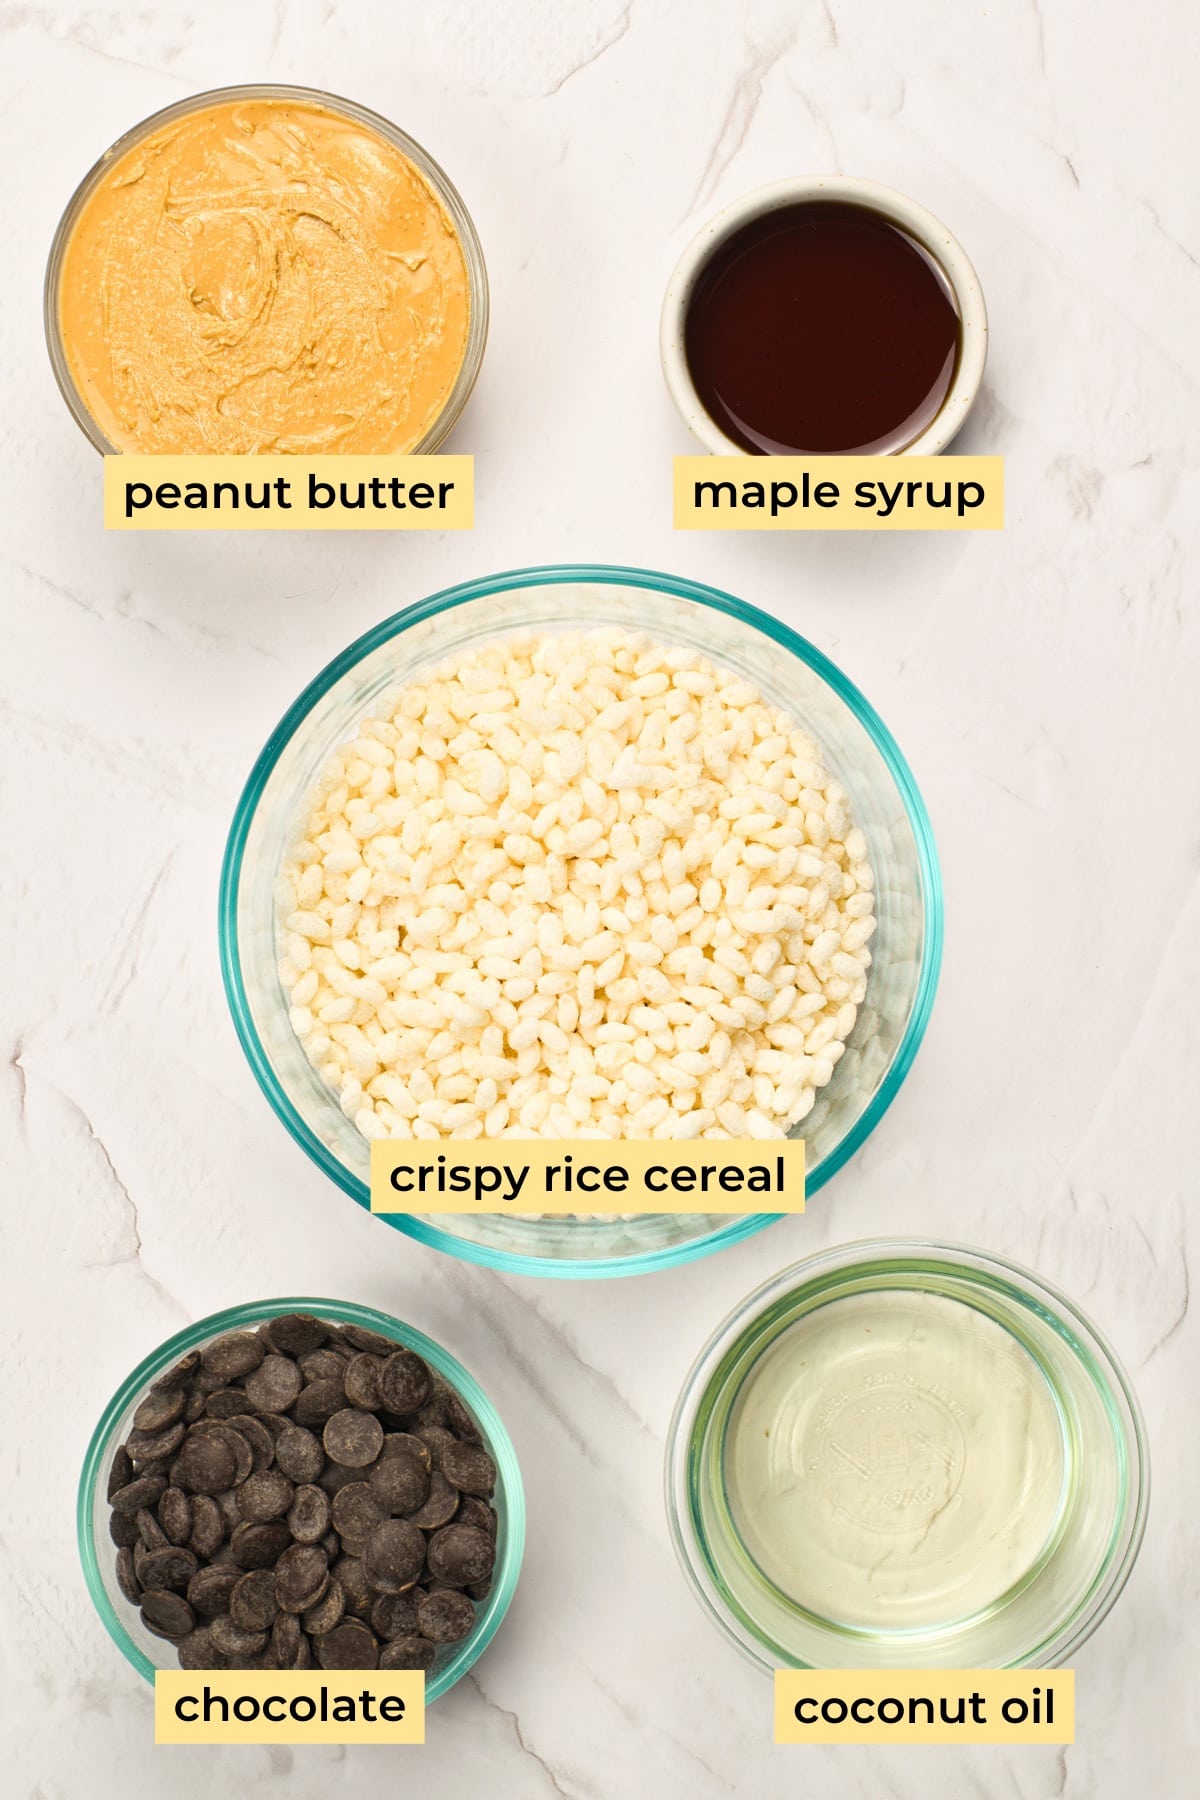 Ingredients: peanut butter, maple syrup, crispy rice cereal, chocolate and coconut oil.